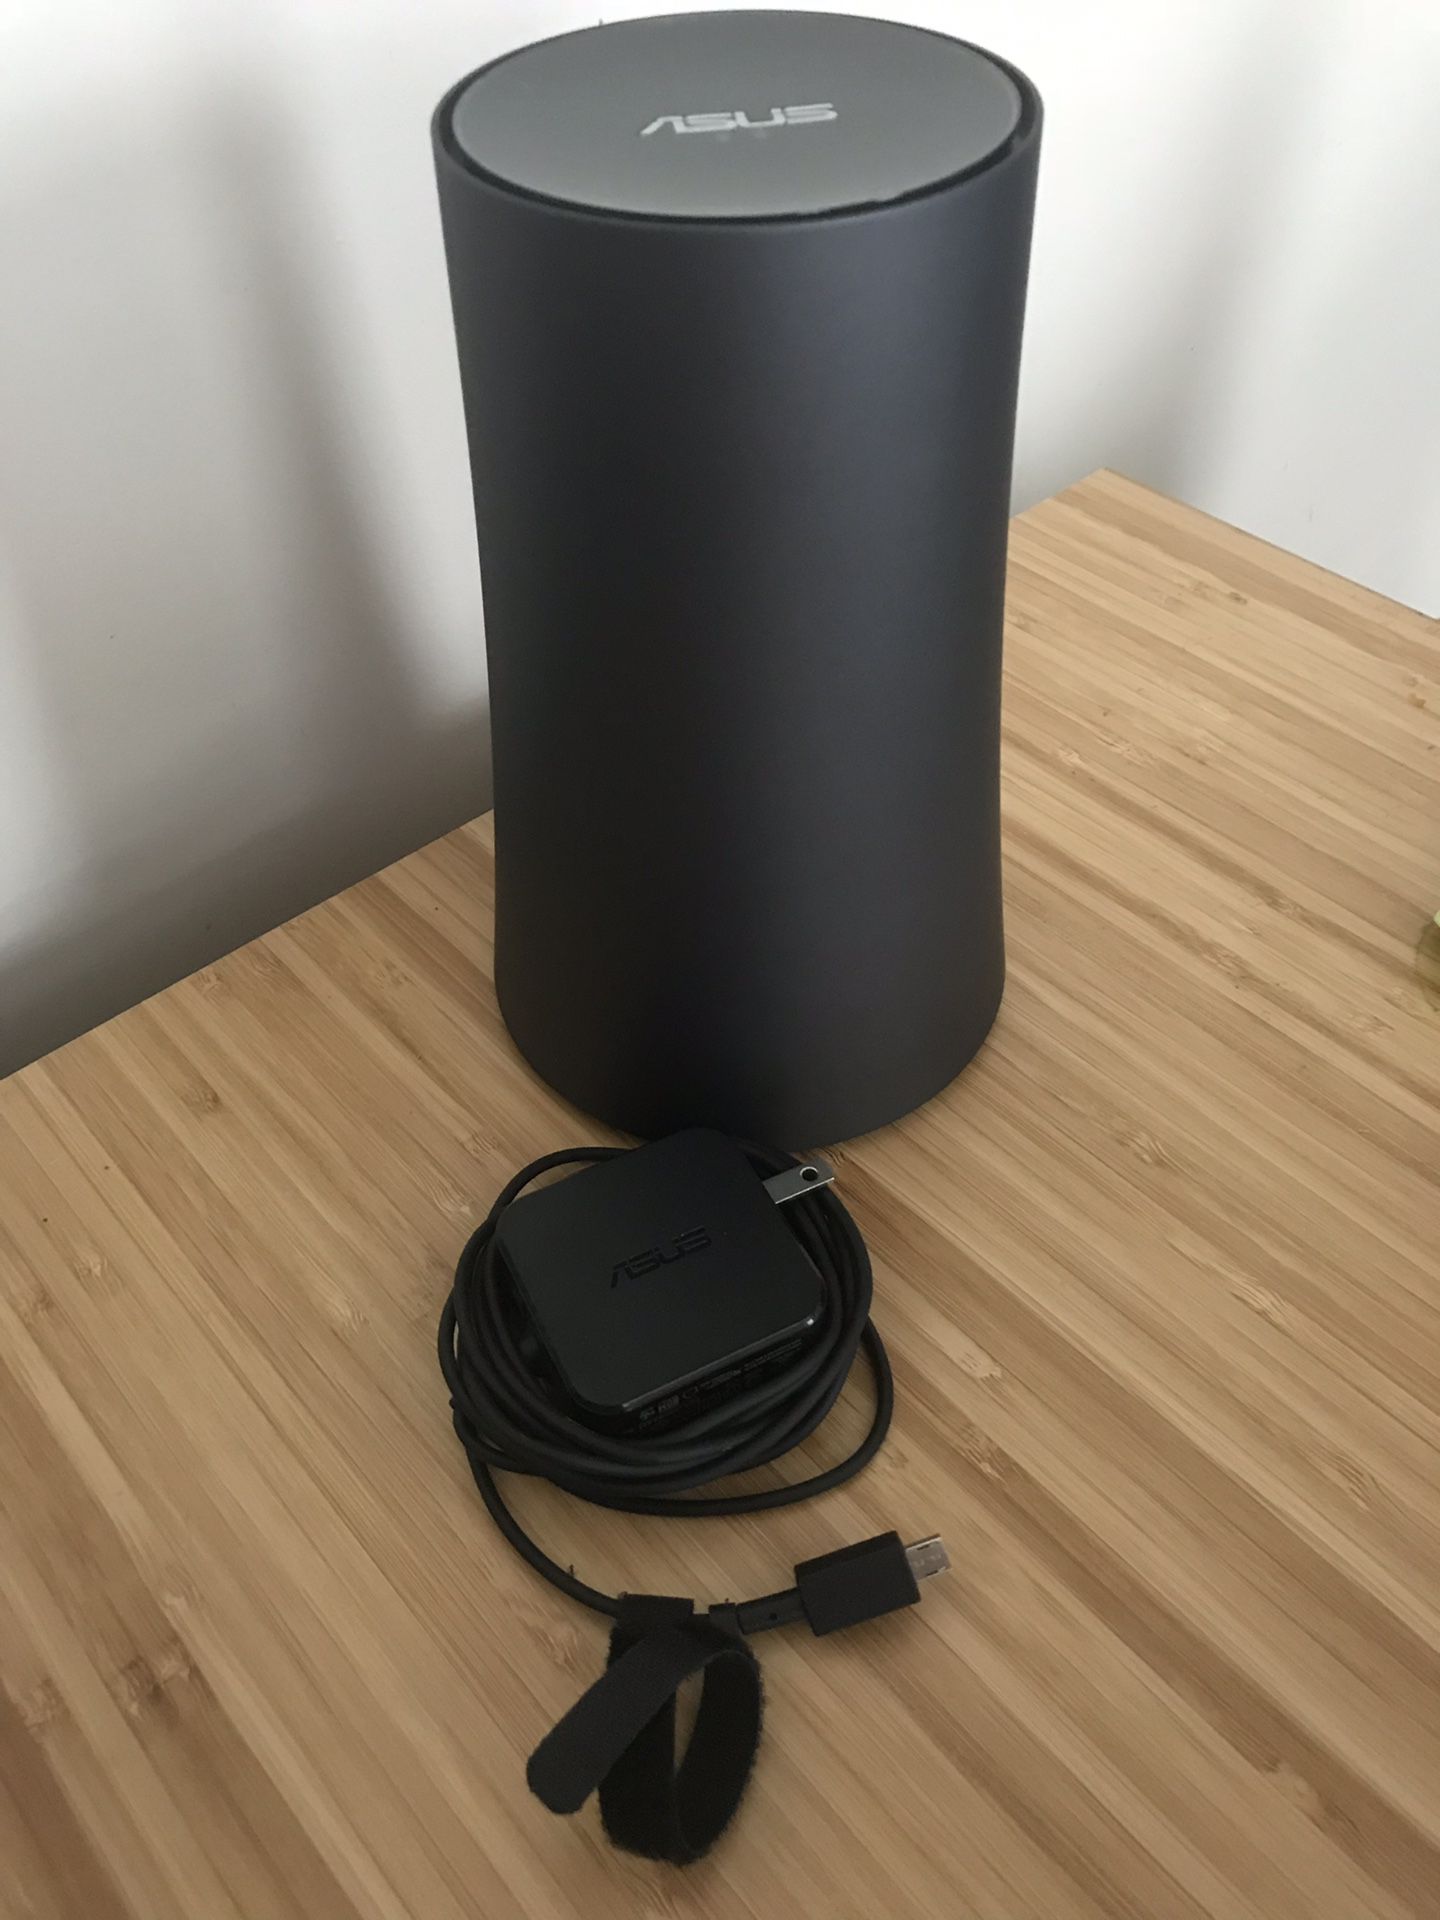 ASUS OnHub Router Google WiFi compatible